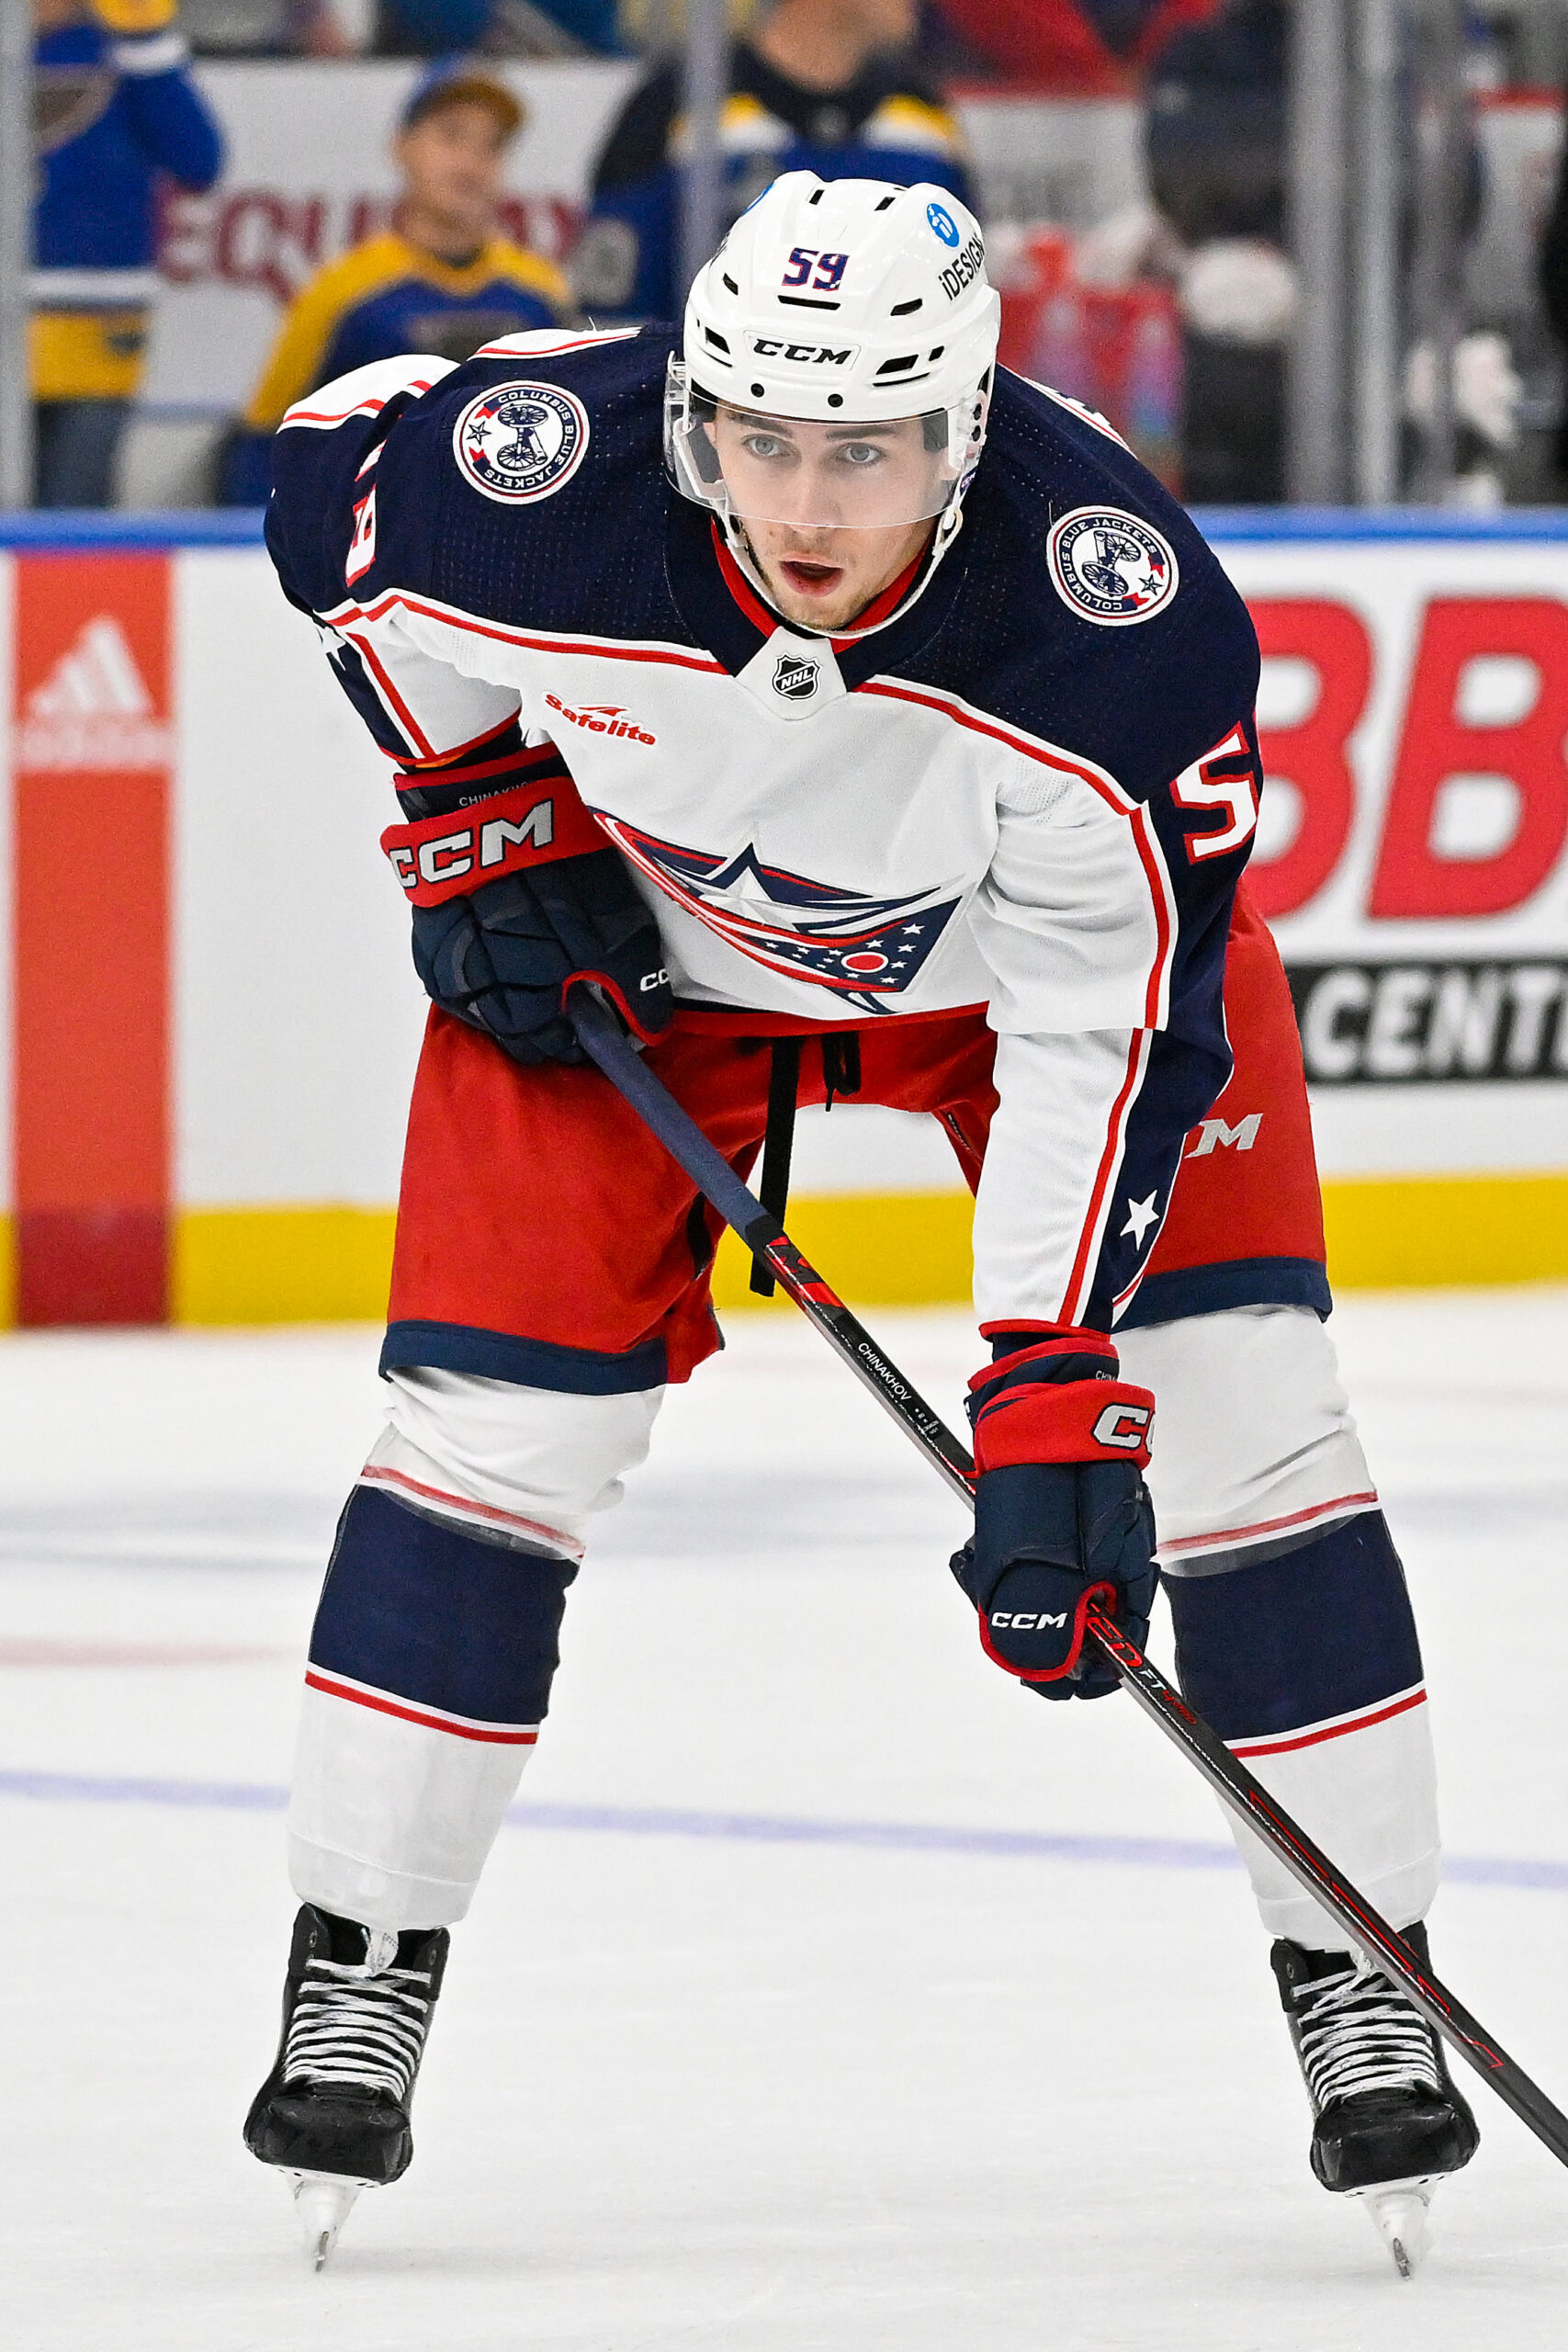 Ivan Provorov - Welcome to the Columbus Blue Jackets - Career